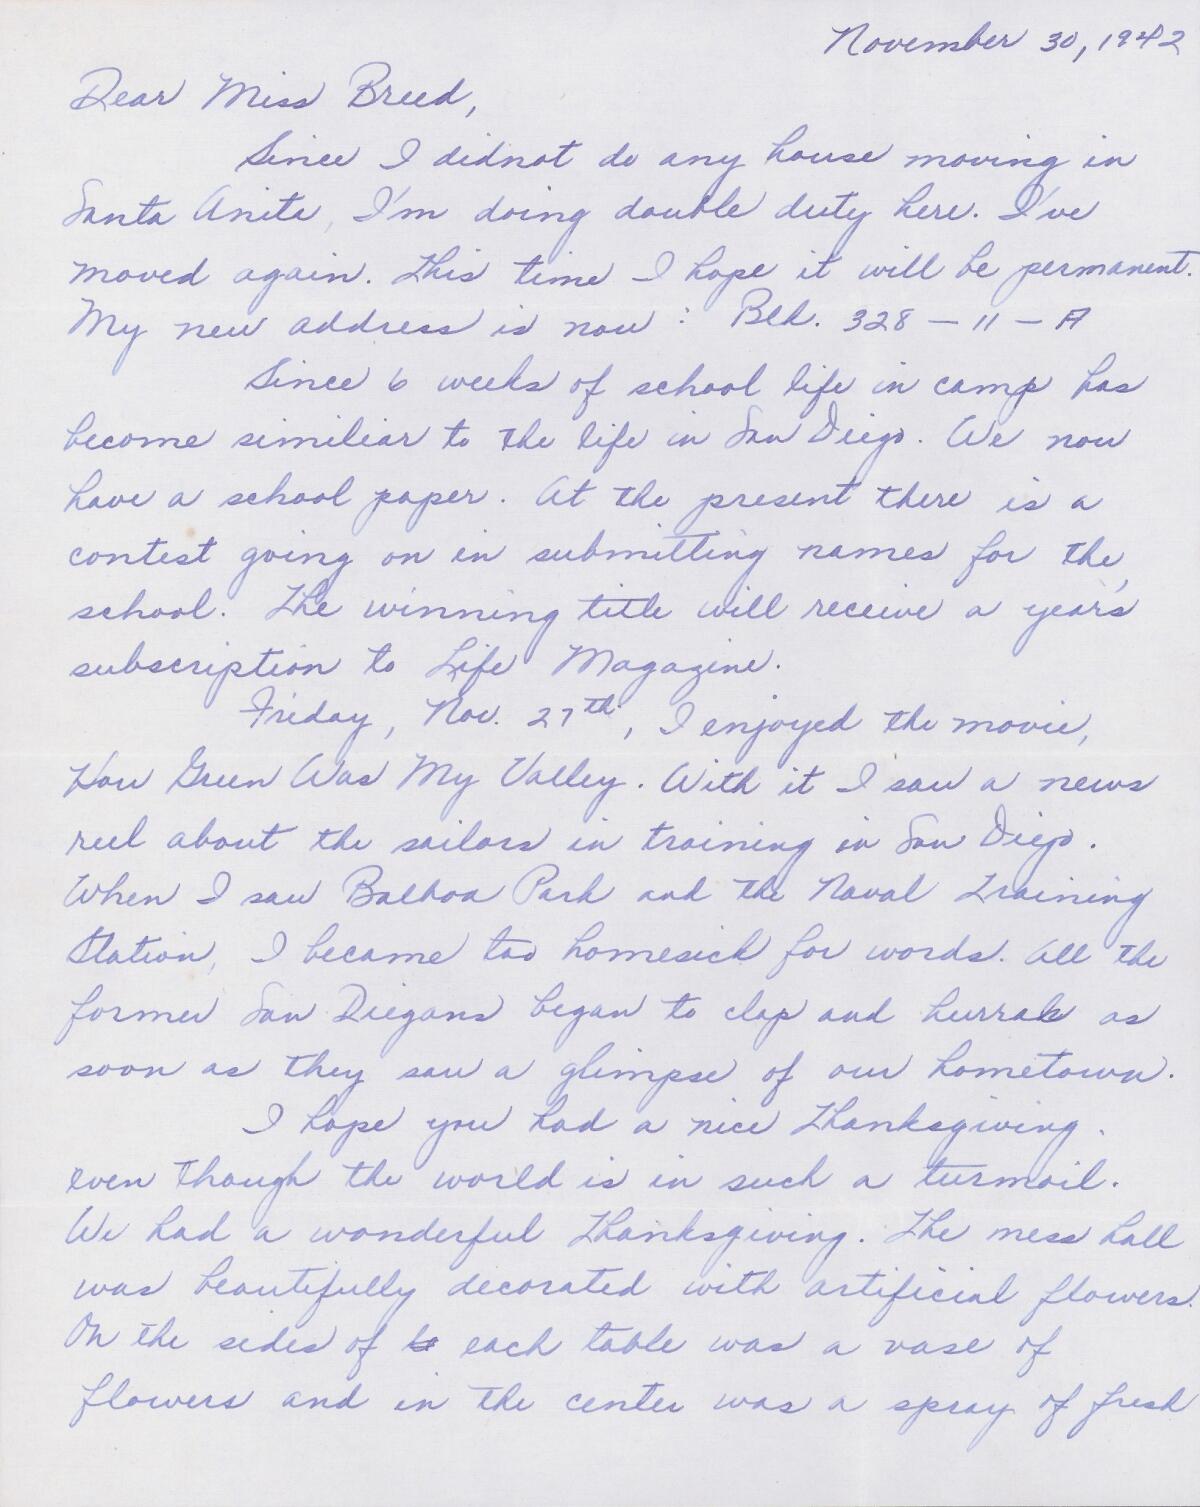 A 1942 letter from Louise Ogawa to Clara Breed (Japanese American National Museum)